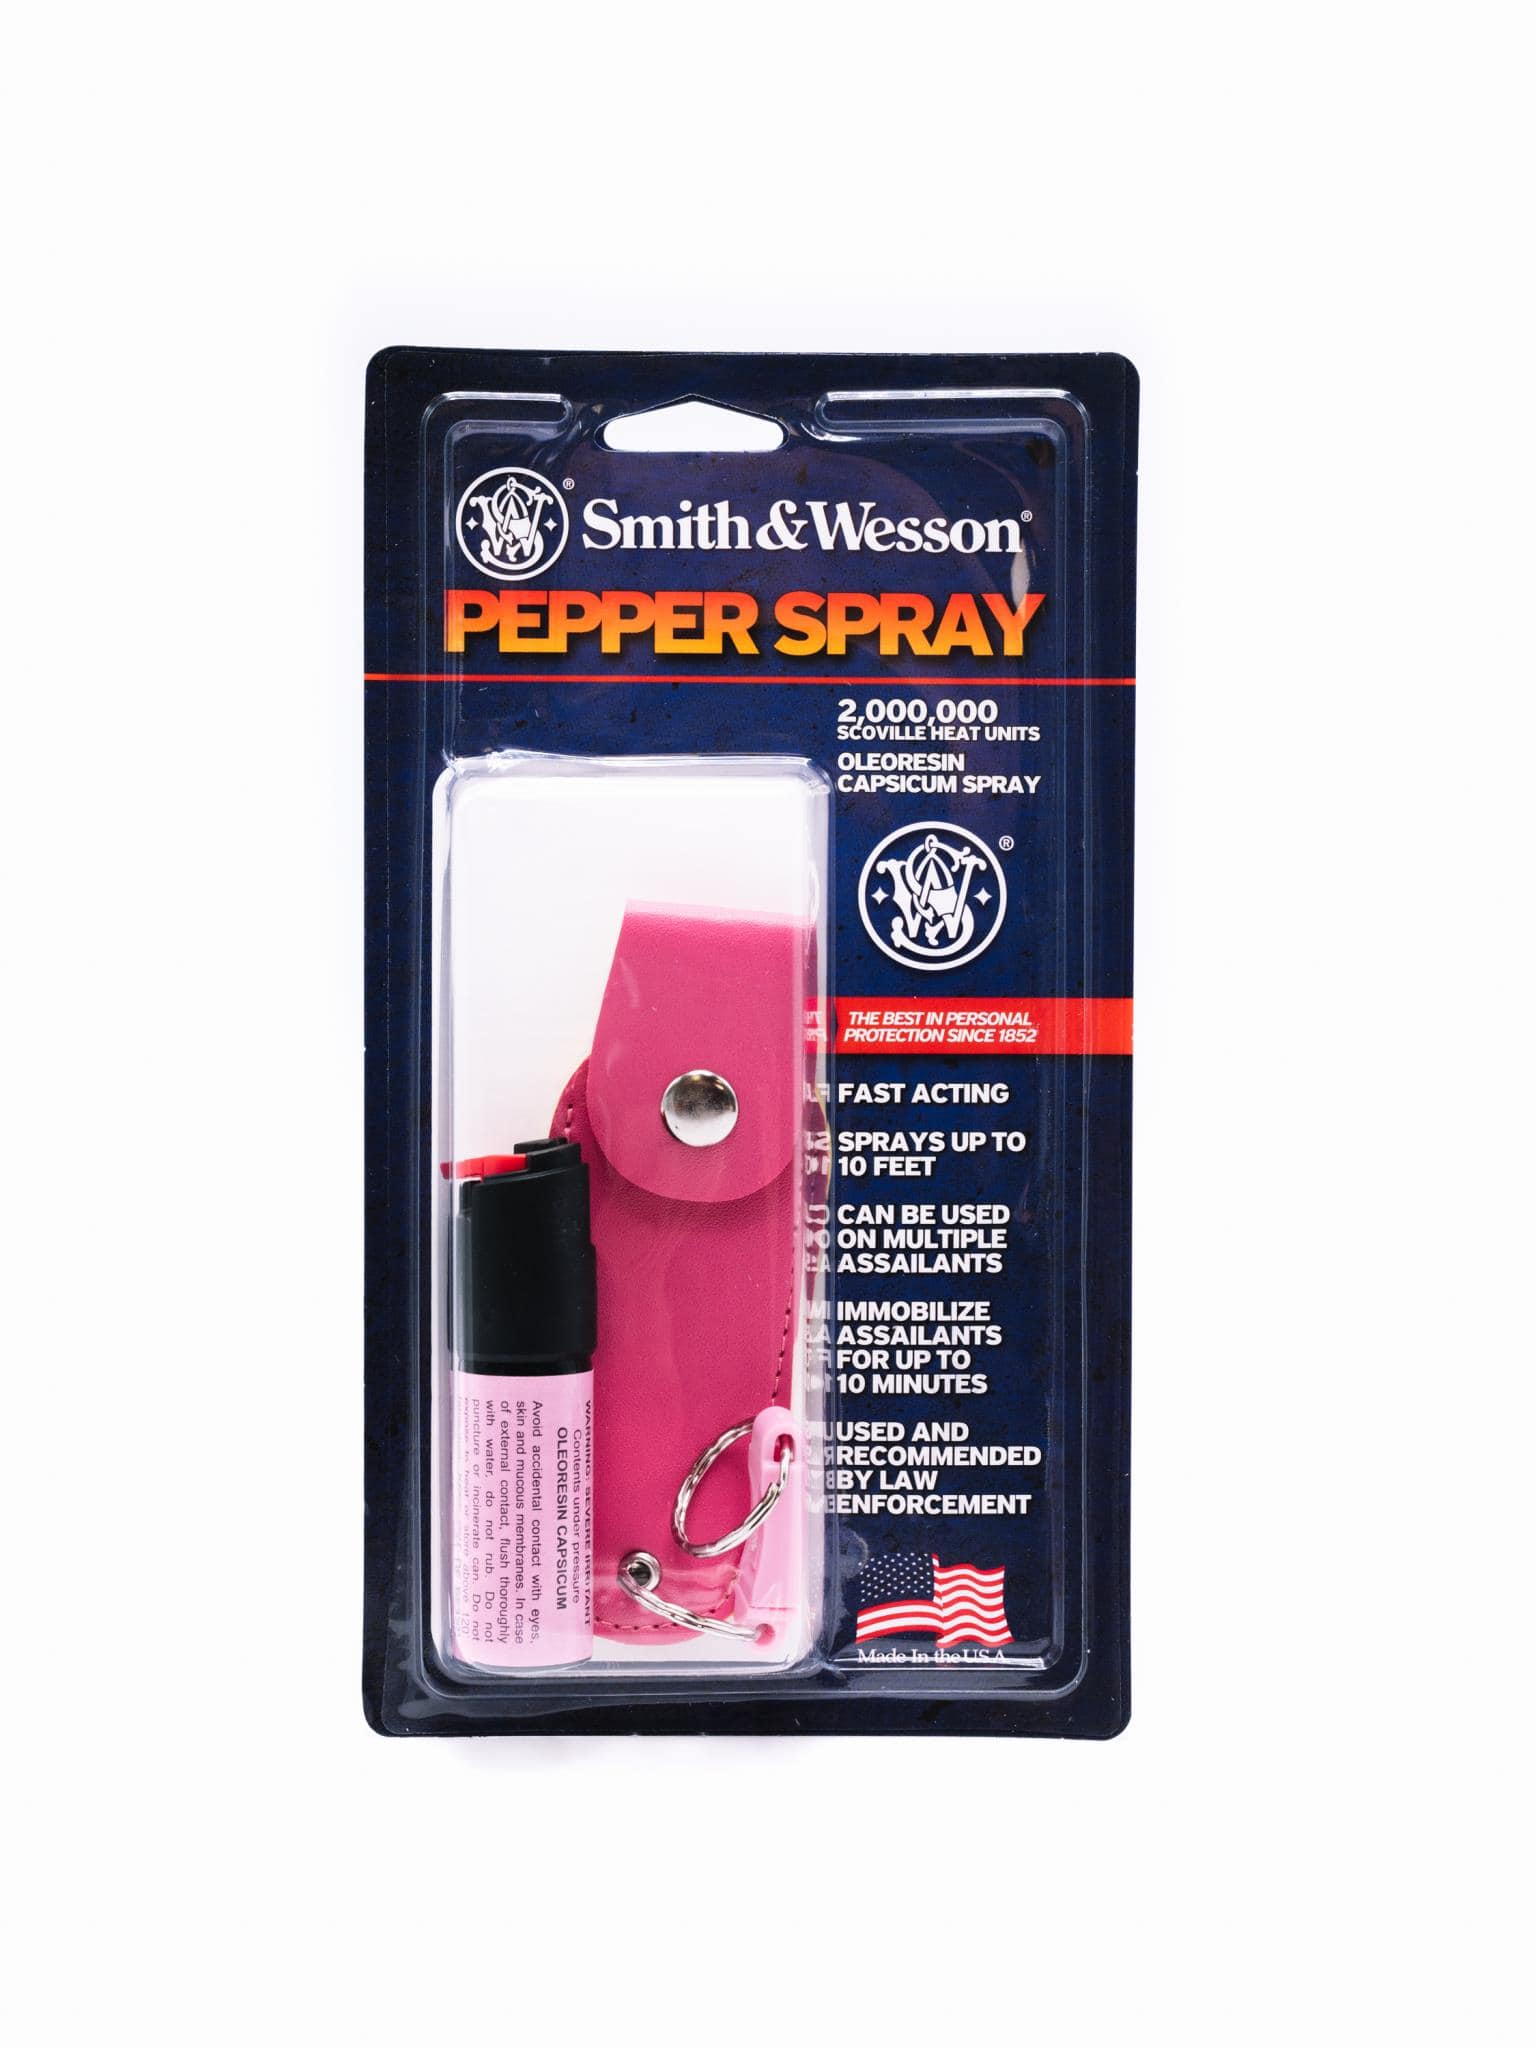 Smith & Wesson 1/2 oz Pepper Spray w/ Leather Holster - Black